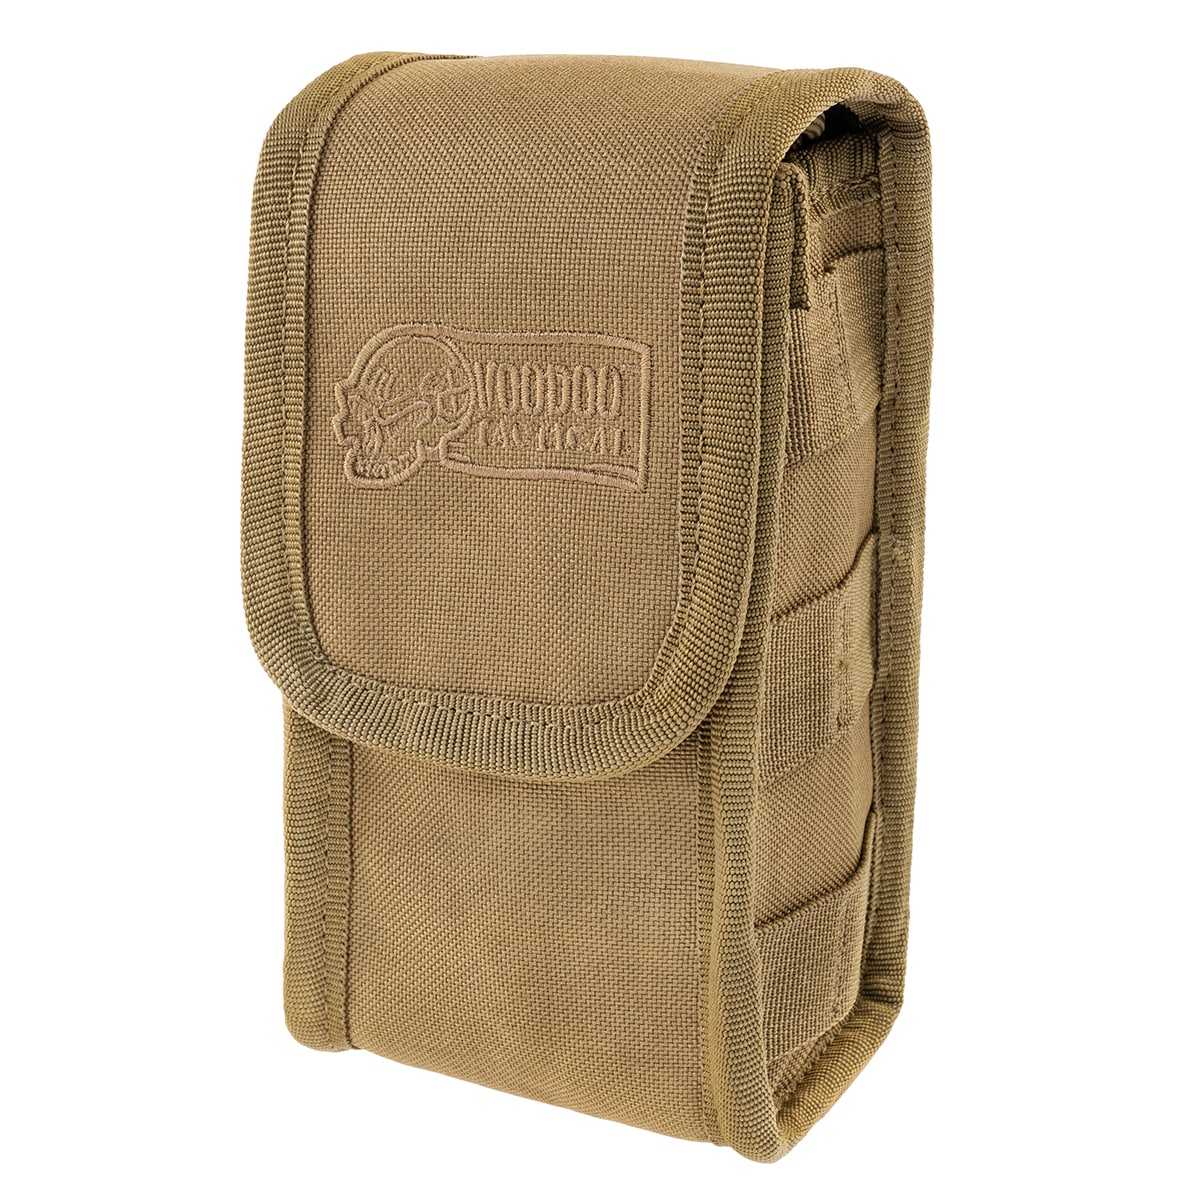 Kieszeń Voodoo Tactical Protective Untility Pouch - Coyote